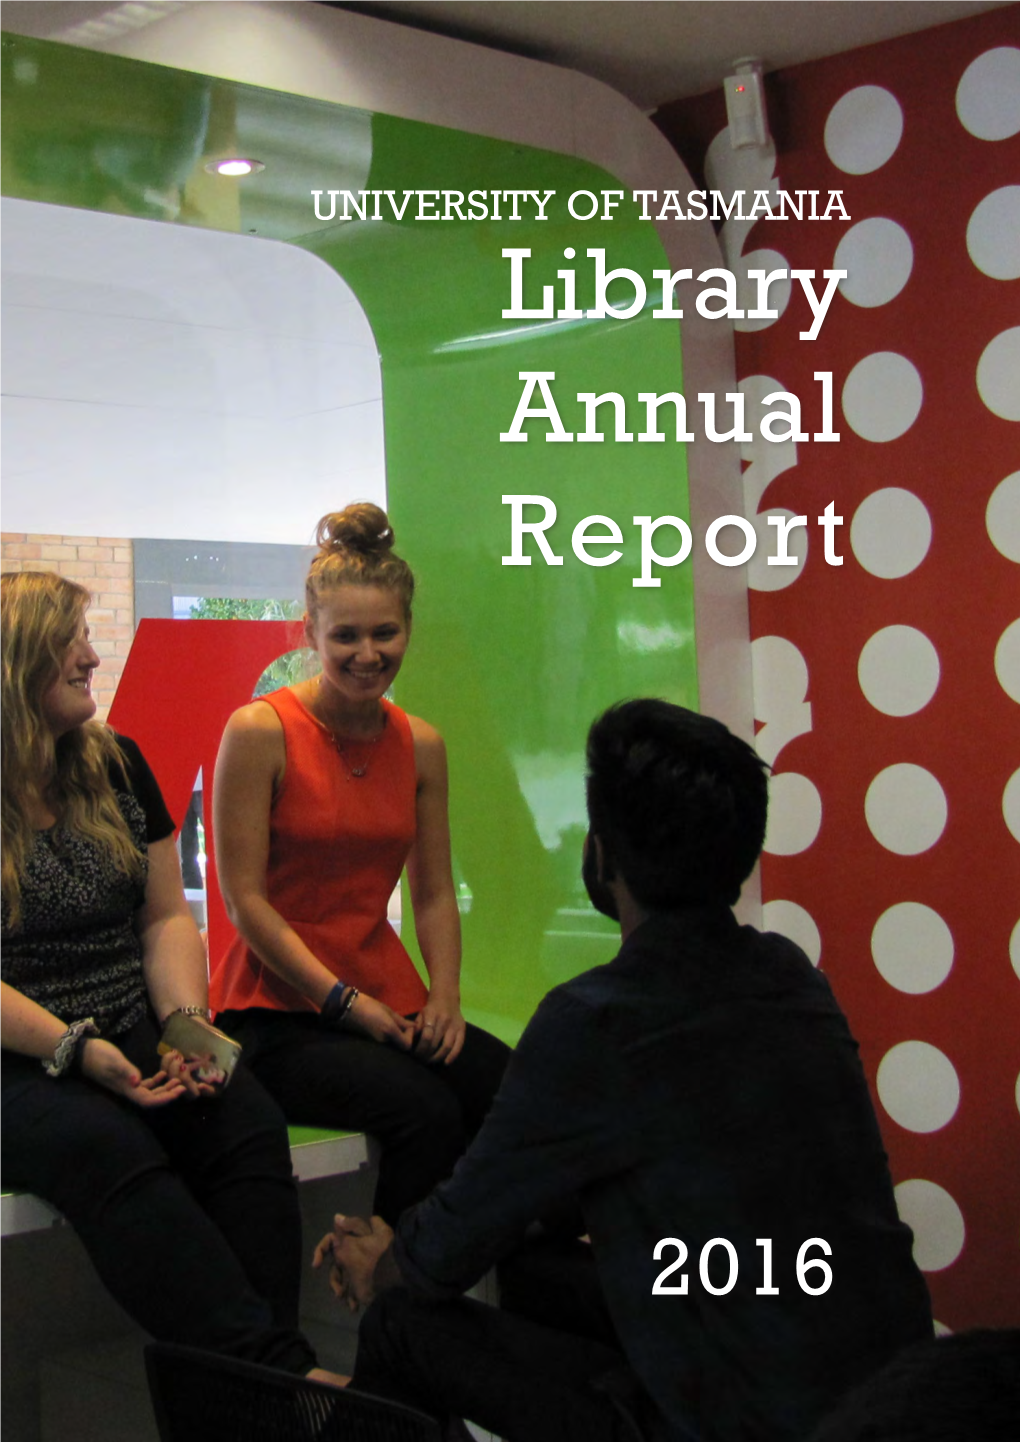 University of Tasmania Library Annual Report 2016 Contents